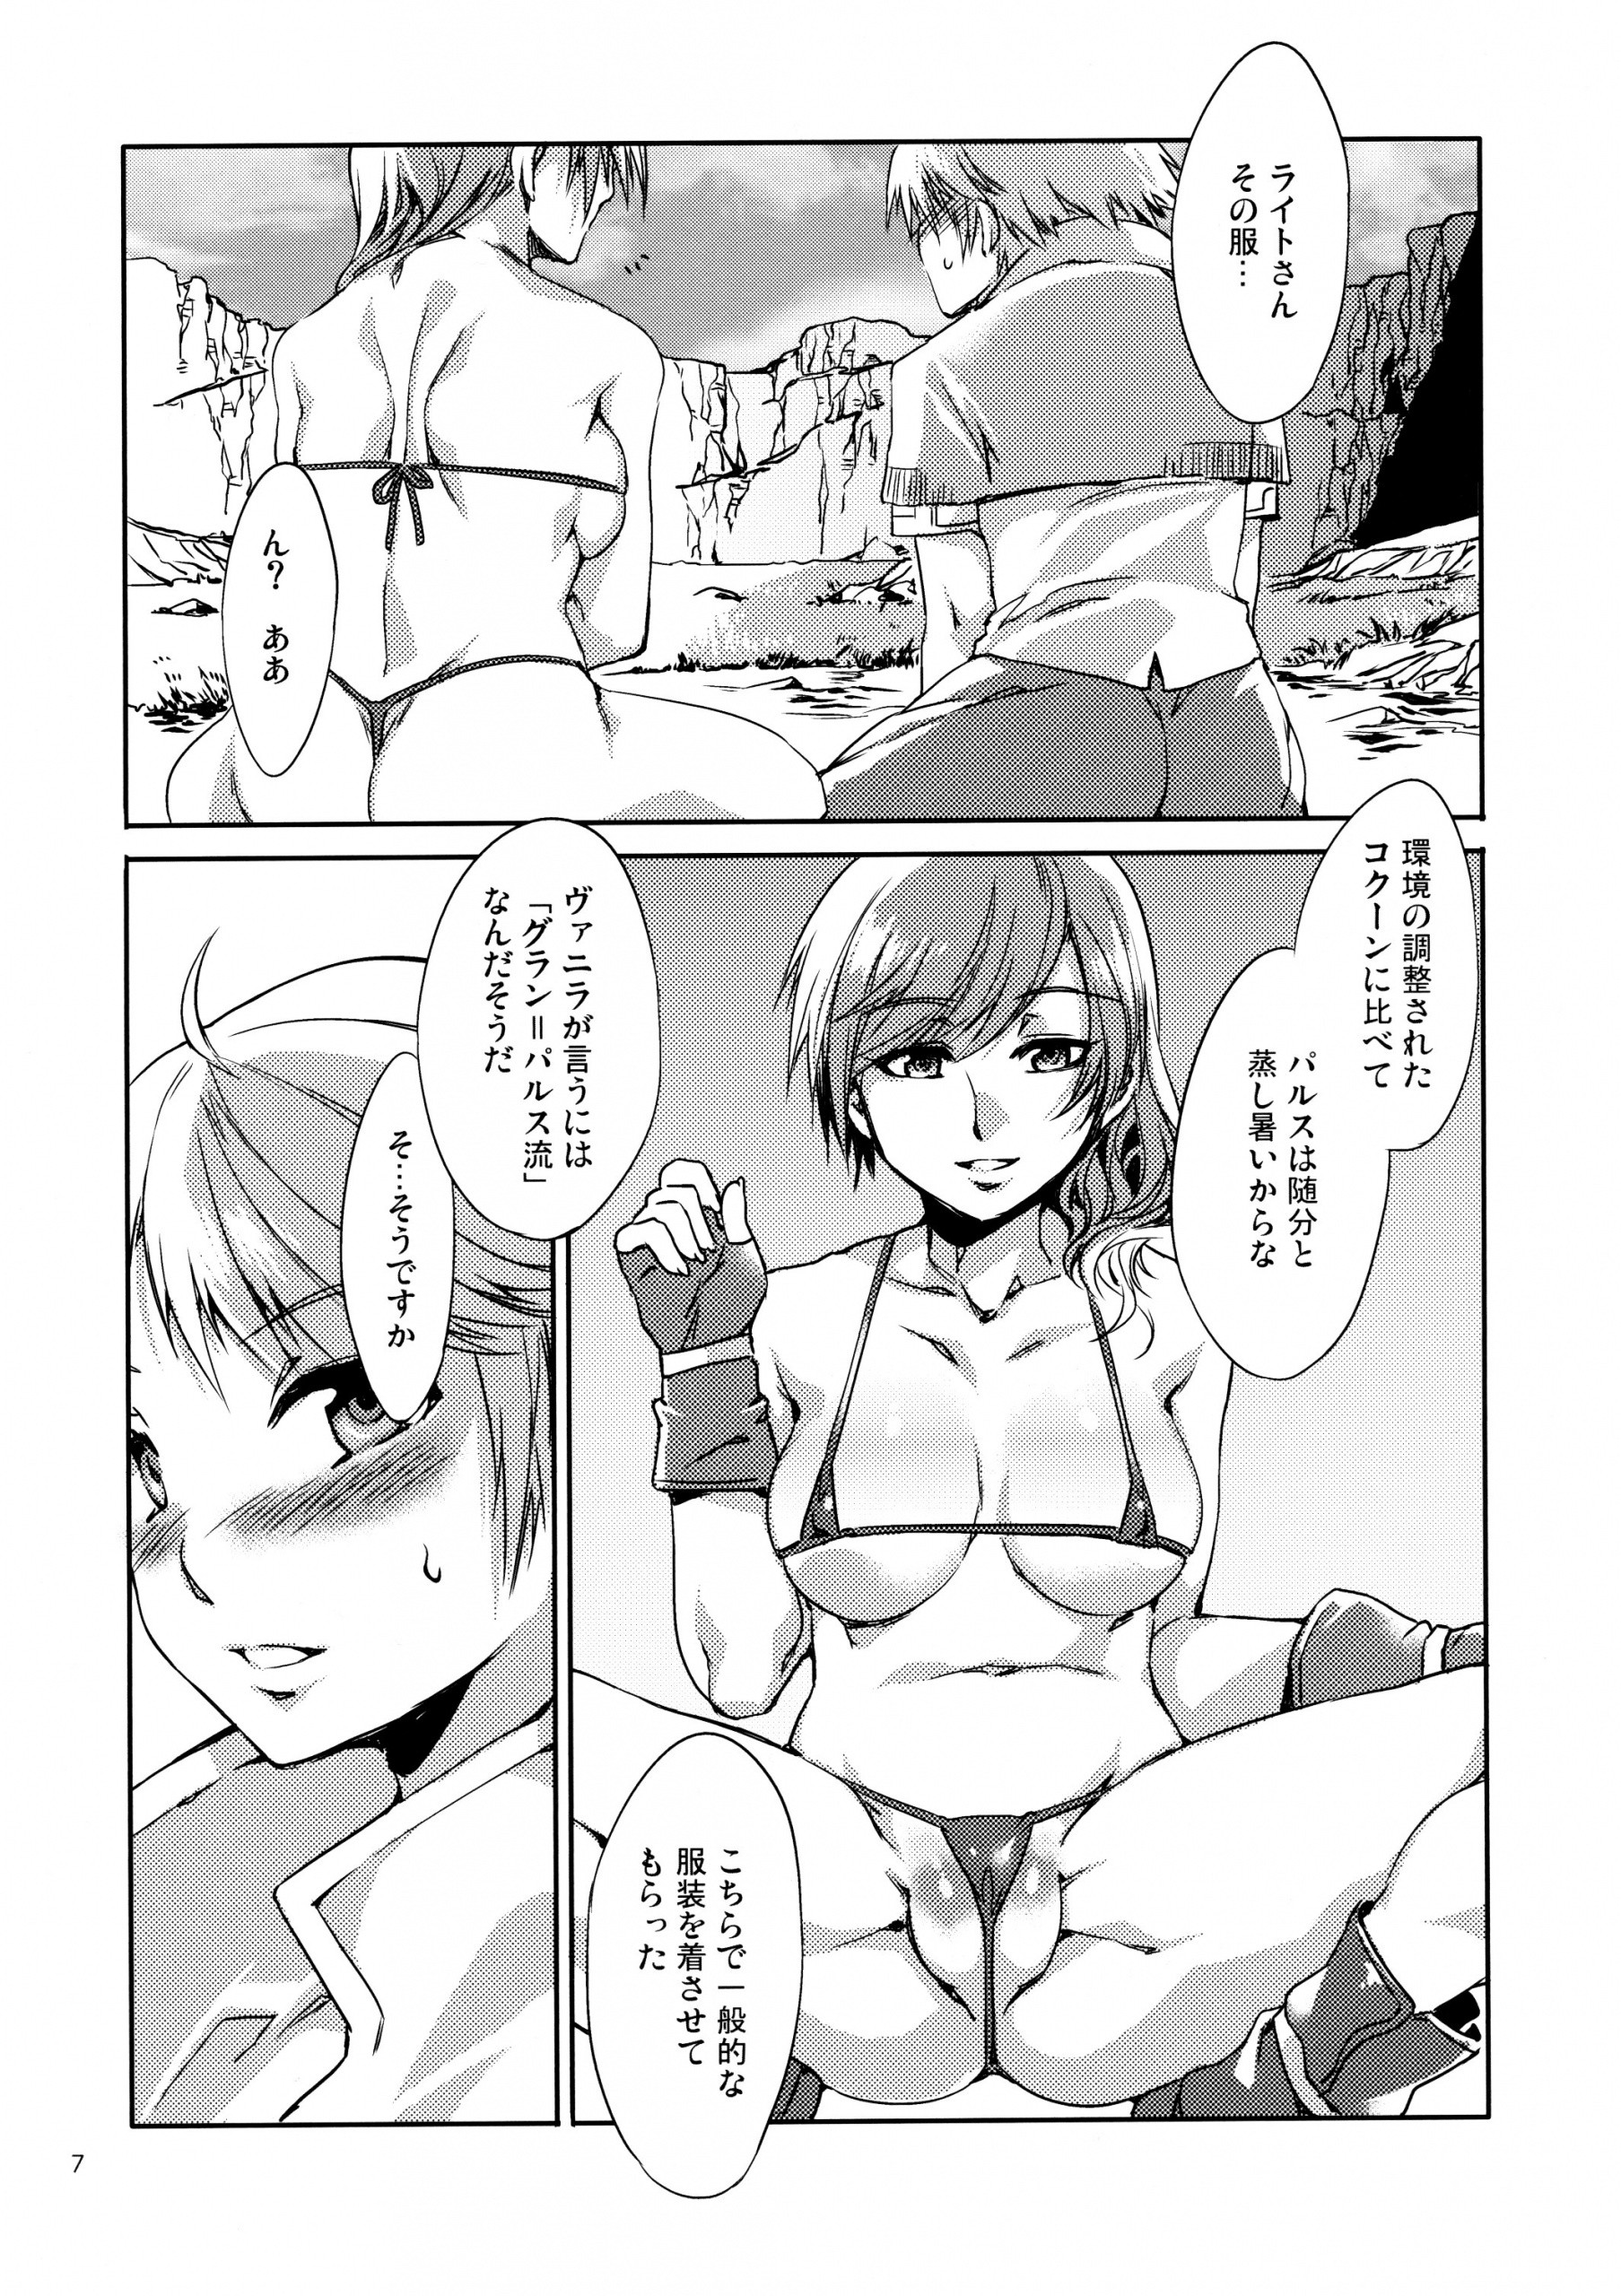 The Doujin Also Known As The Speed Of Light porn comic picture 4